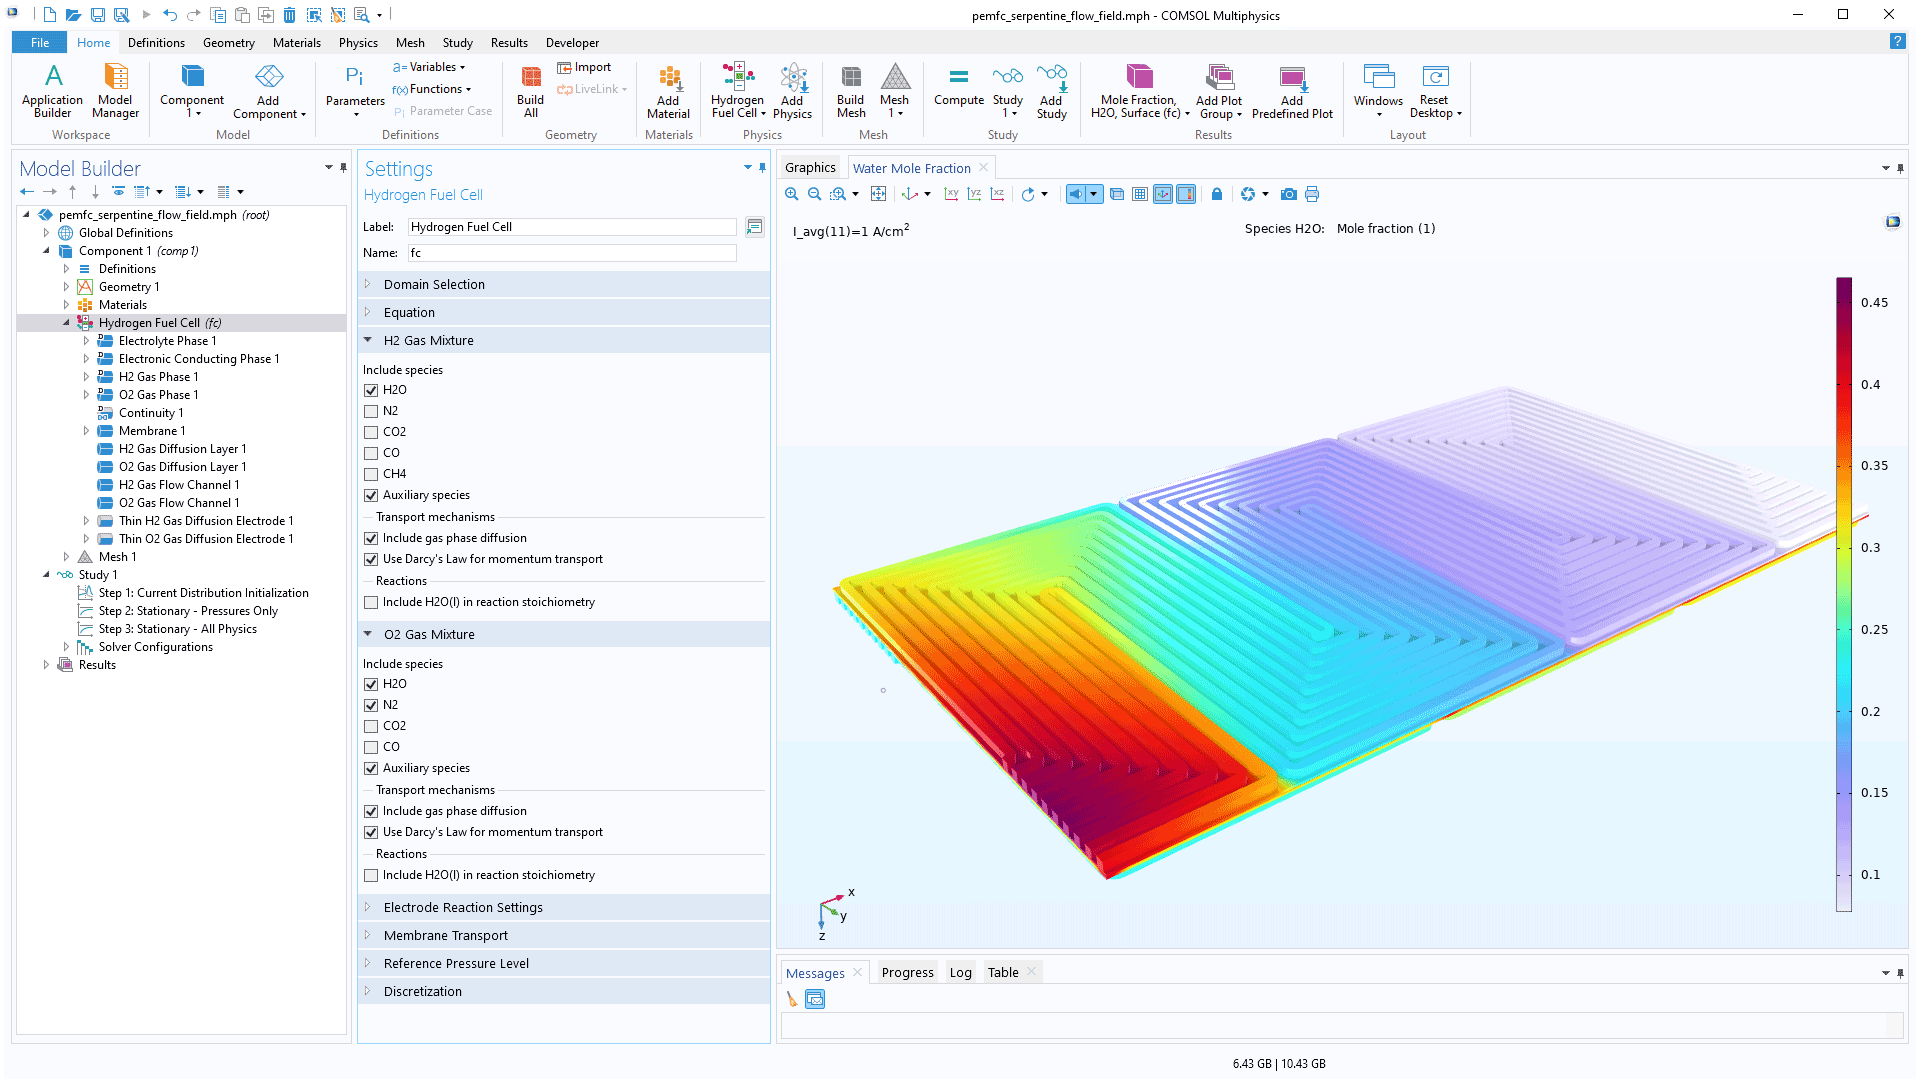 The COMSOL Multiphysics UI showing the Model Builder with the Hydrogen Fuel Cell node highlighted, the corresponding Settings window, and a PEMFC model in the Graphics window.